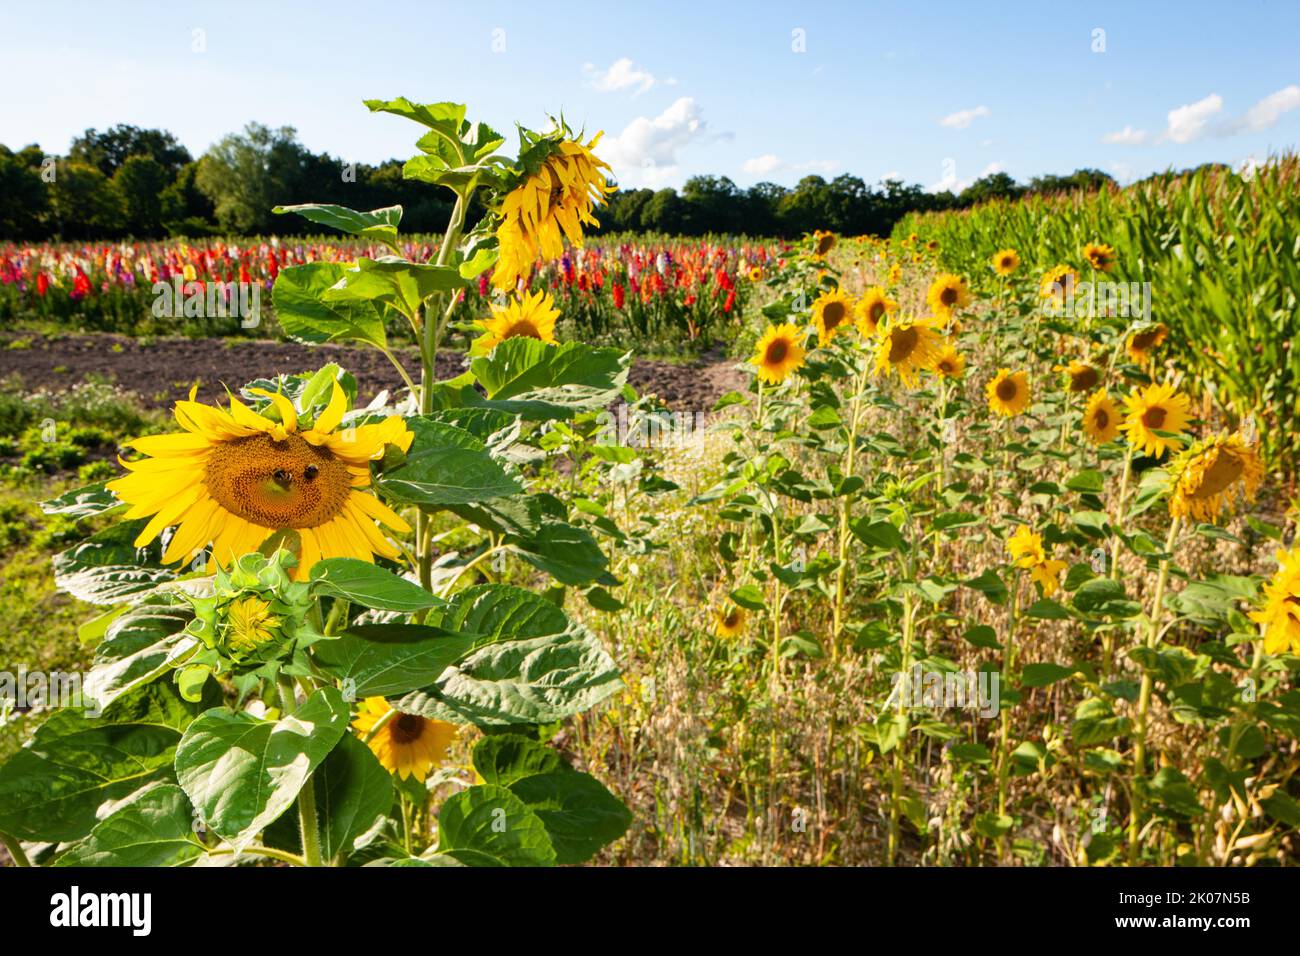 Sunflowers (Helianthus annuus), family Asteraceae, and sword lilies (Gladiolus), family Iridaceae, Leer, East Frisia, Germany Stock Photo